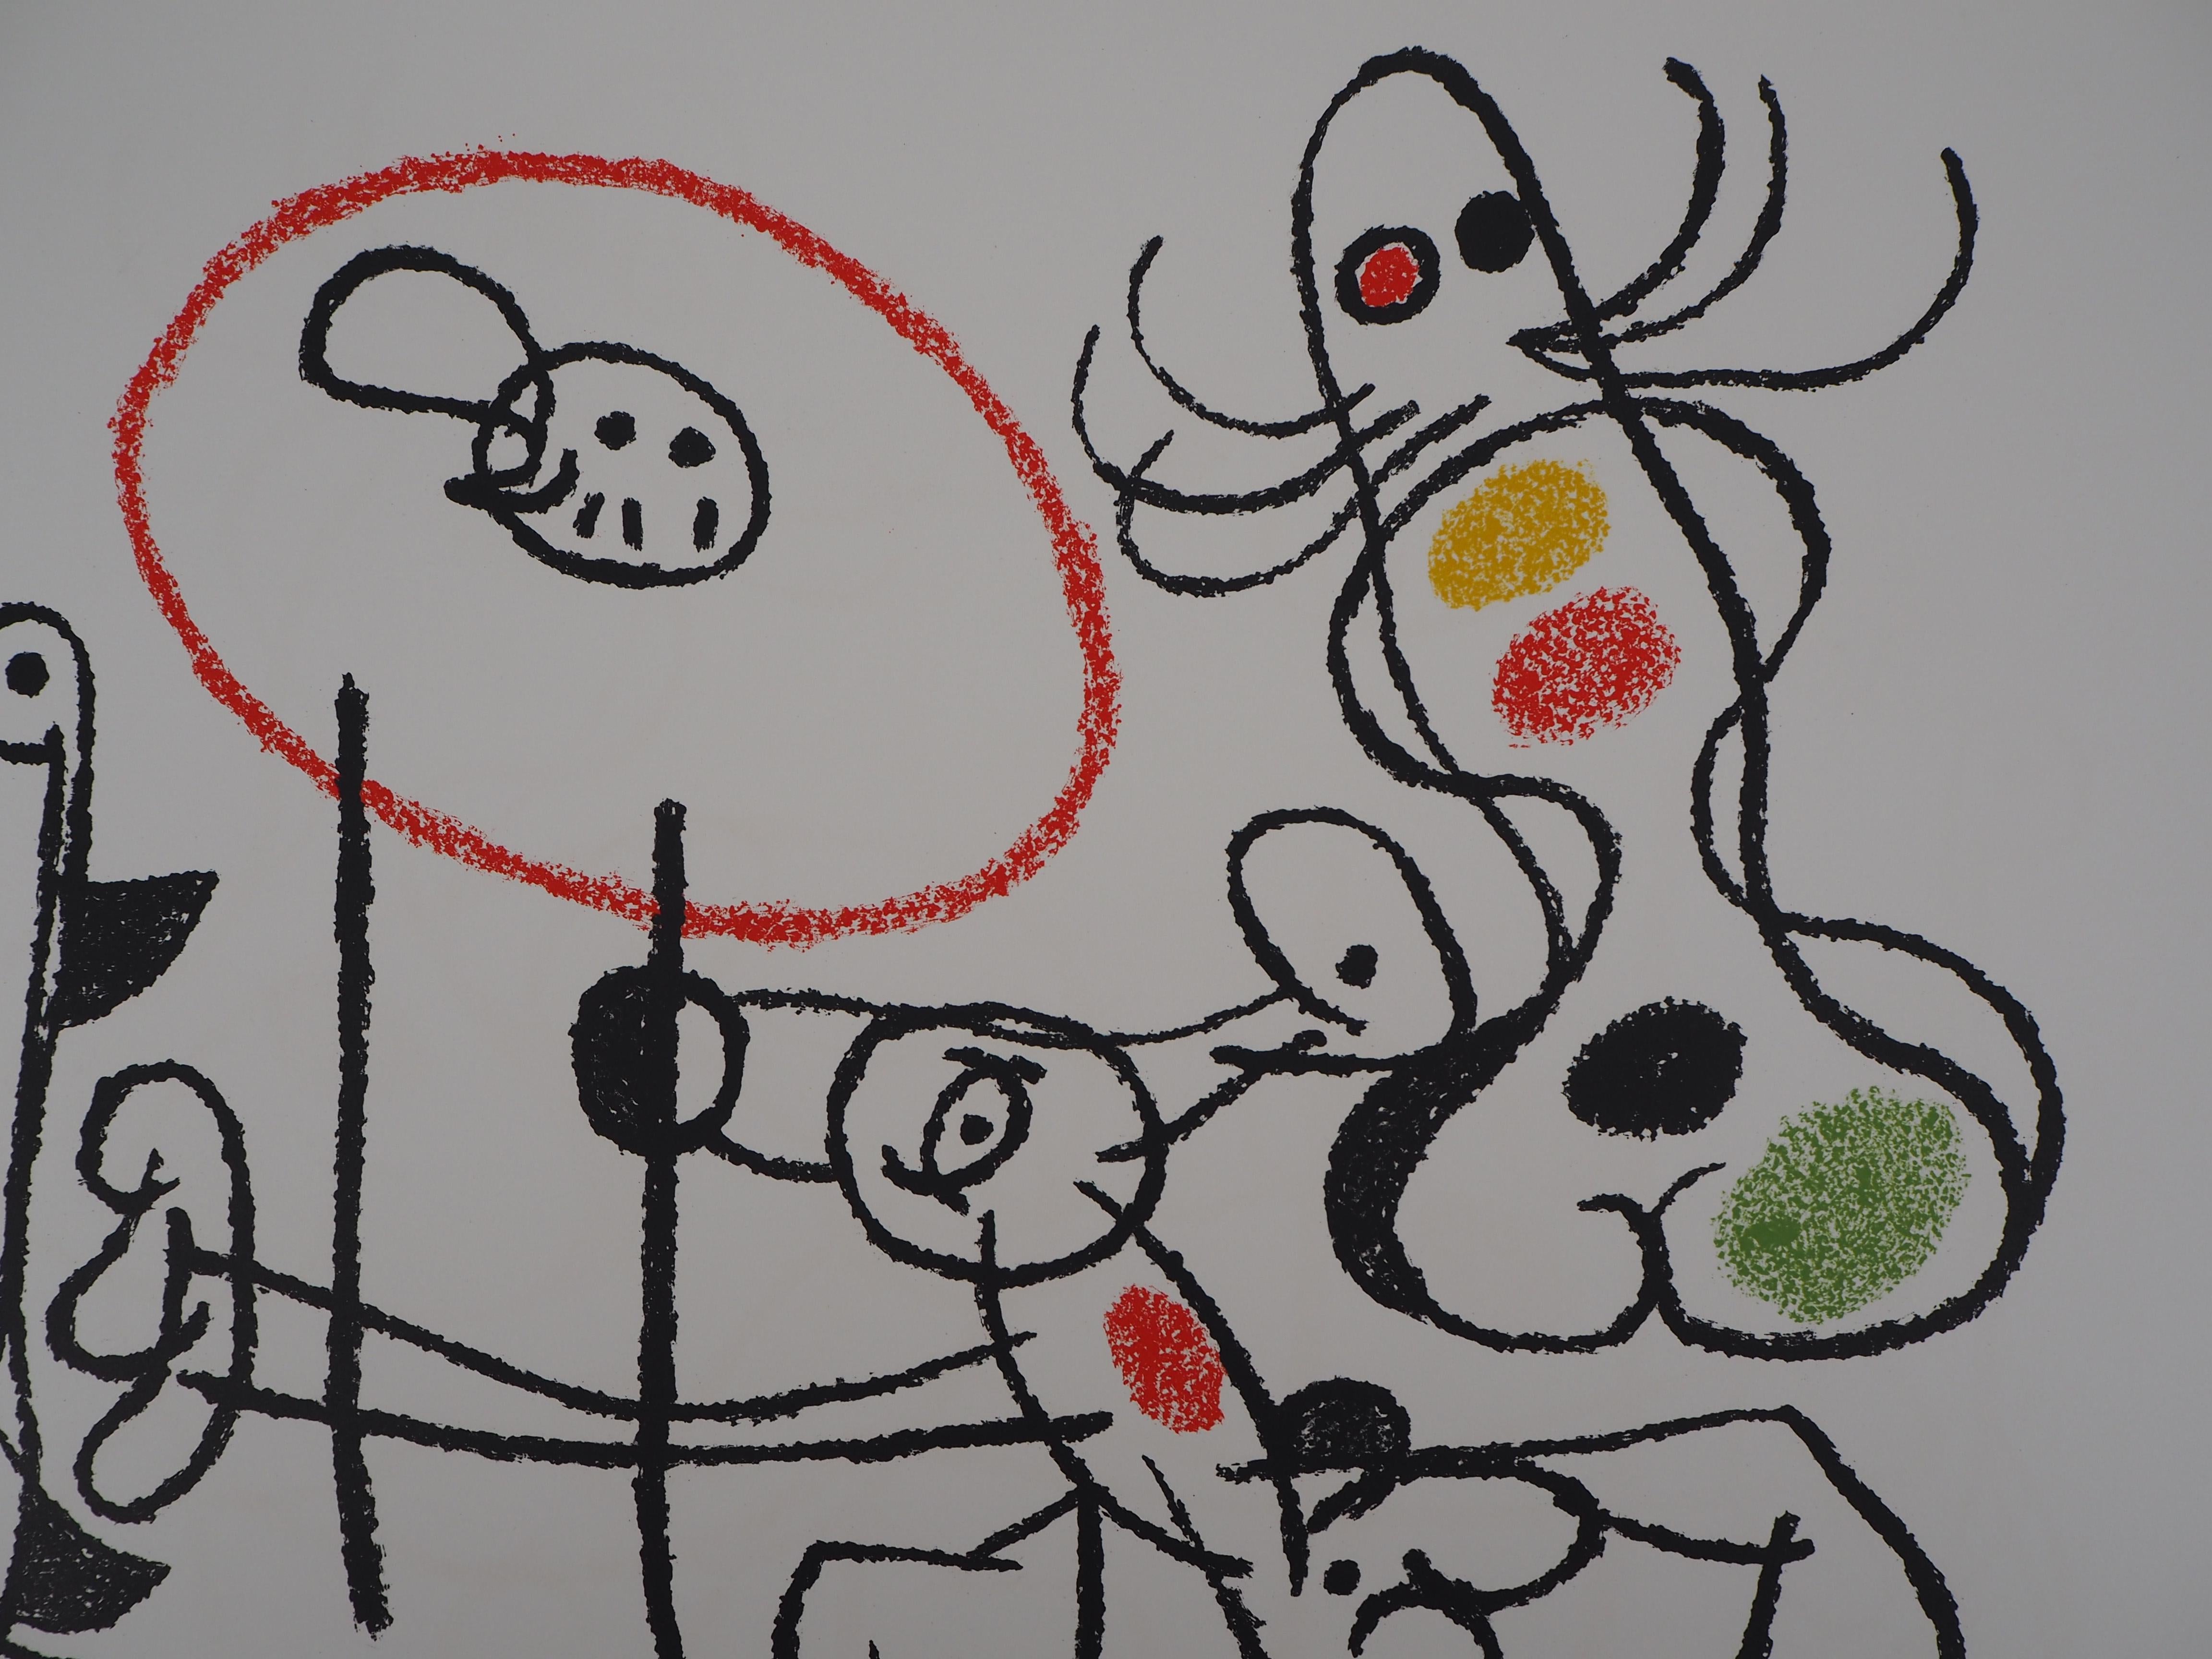 Ubu : Two Surrealist Figures - Original Handsigned Lithograph - Mourlot 1971 - Abstract Print by Joan Miró